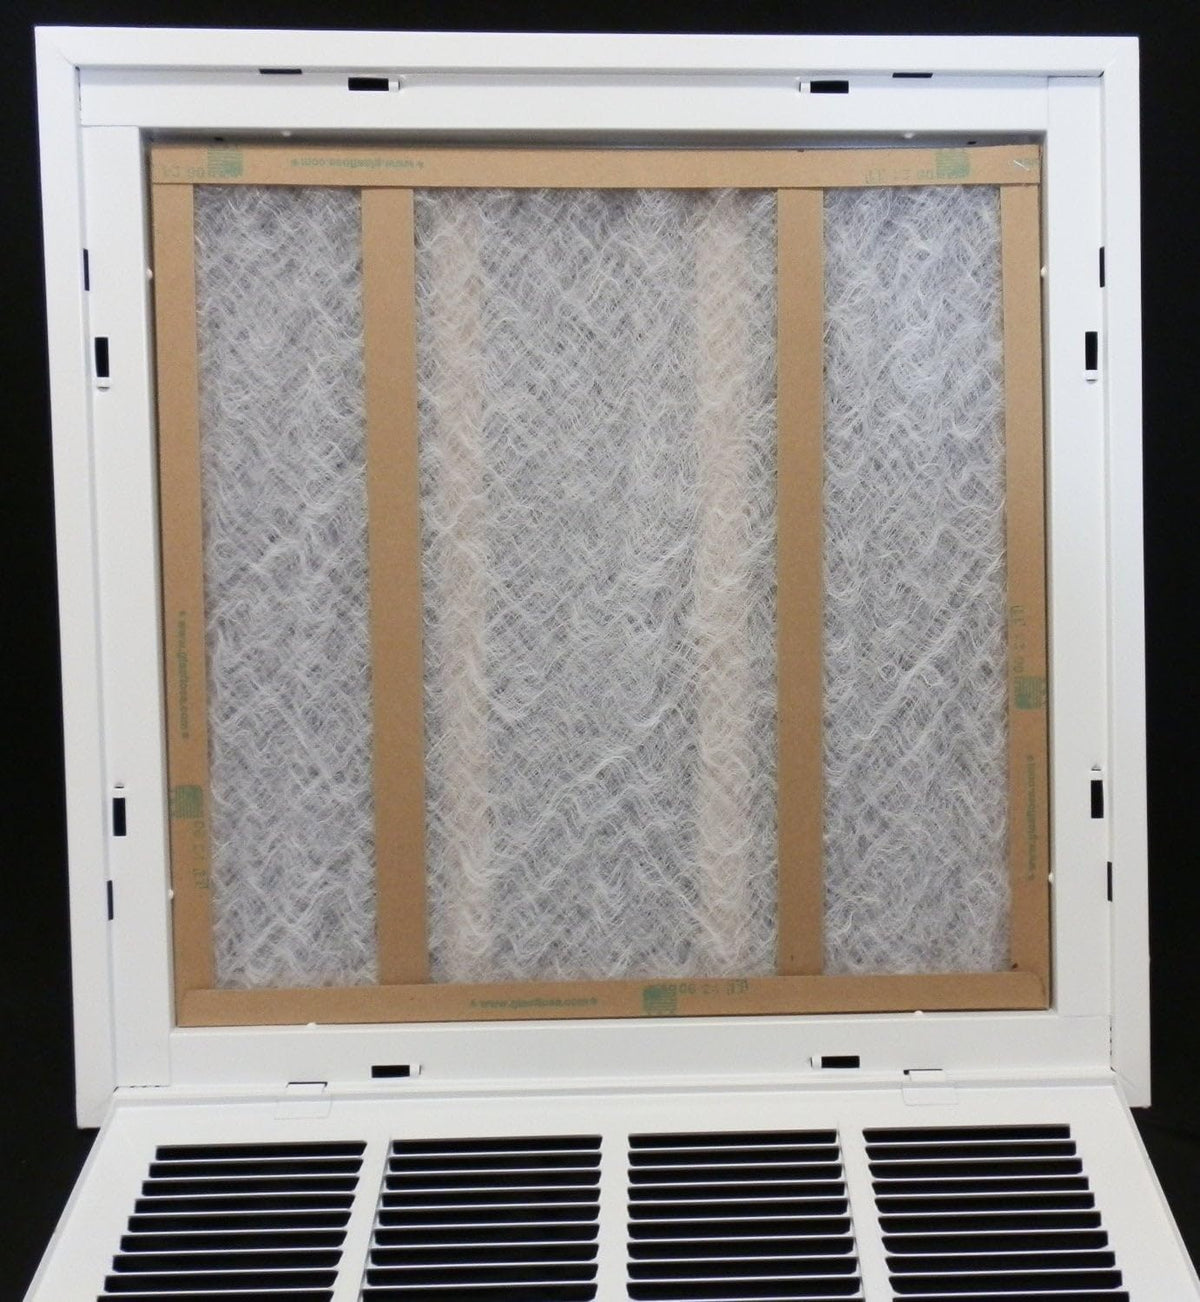 22&quot; X 32&quot; Steel Return Air Filter Grille for 1&quot; Filter - Removable Frame - [Outer Dimensions: 24 5/8&quot; X 34 5/8&quot;]